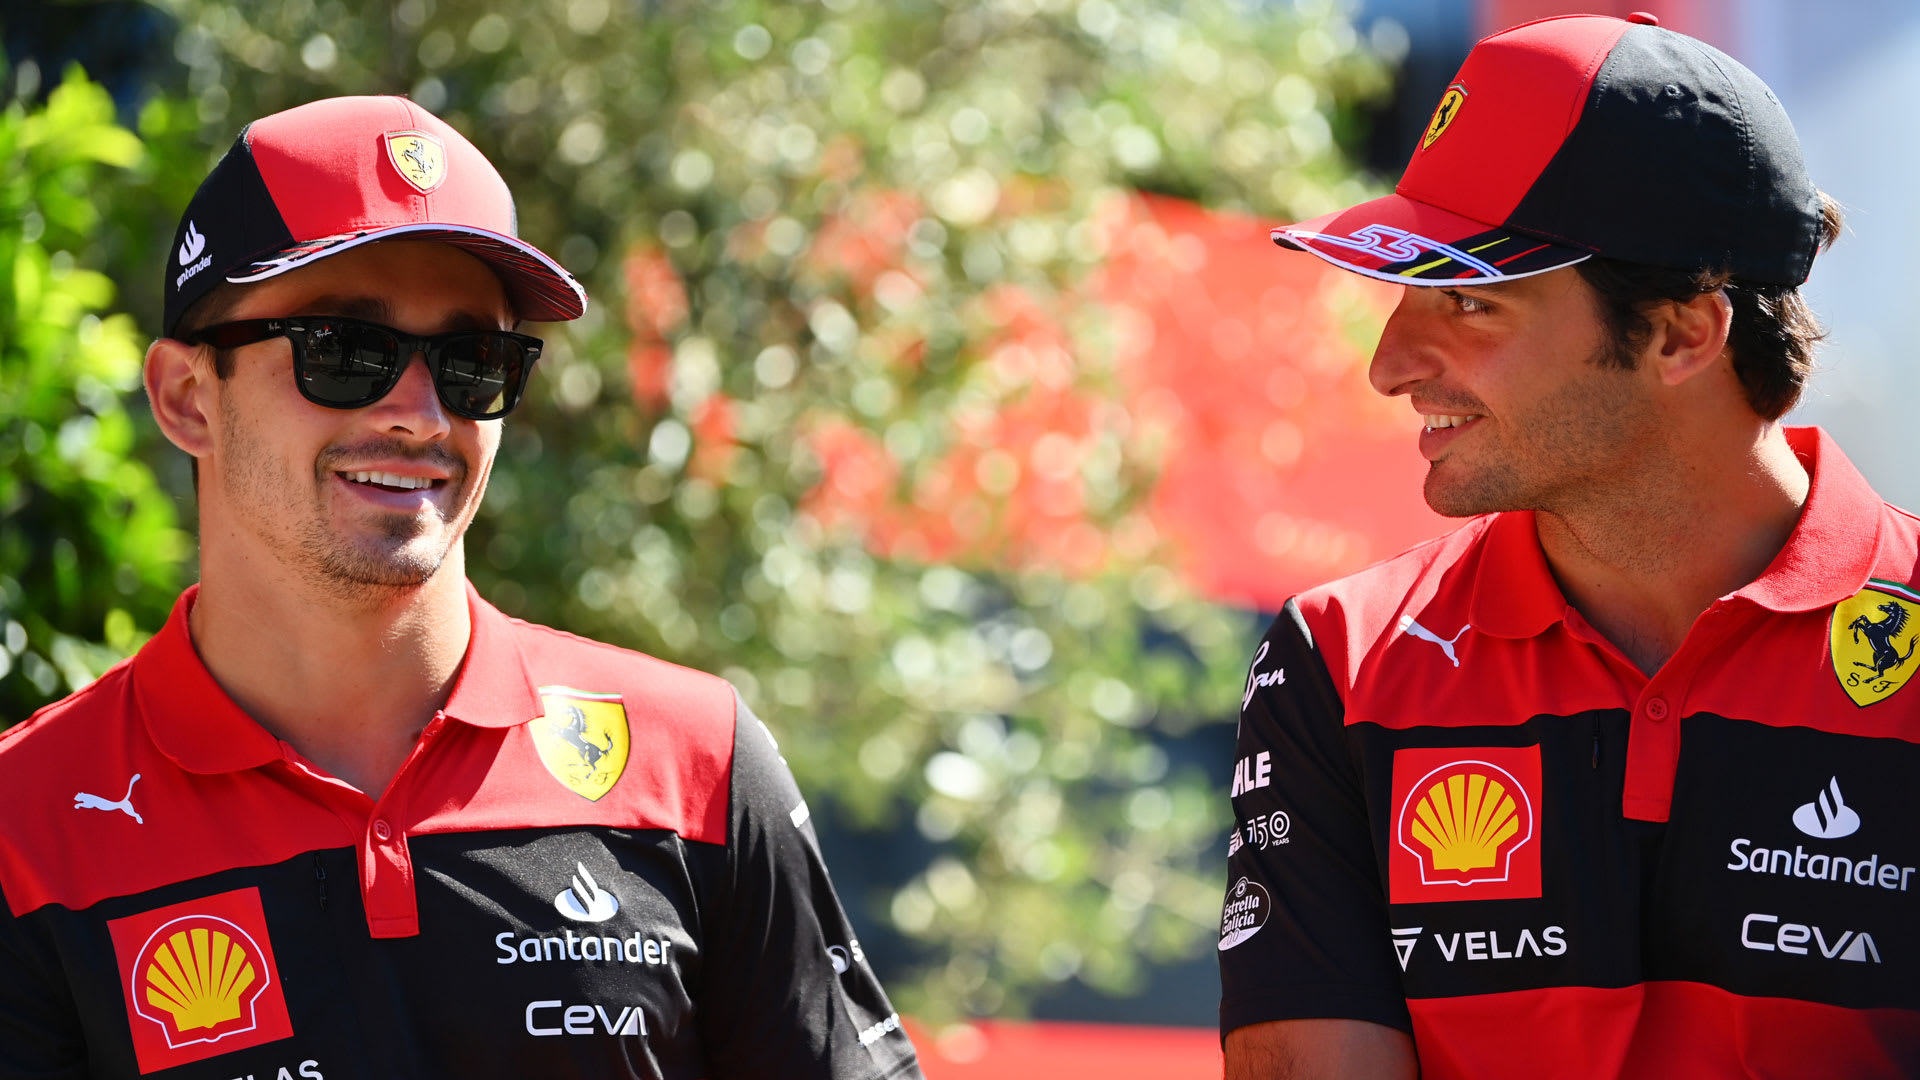 It's great to be back feeling competitive' say Ferrari drivers after  topping FP2 | Formula 1®